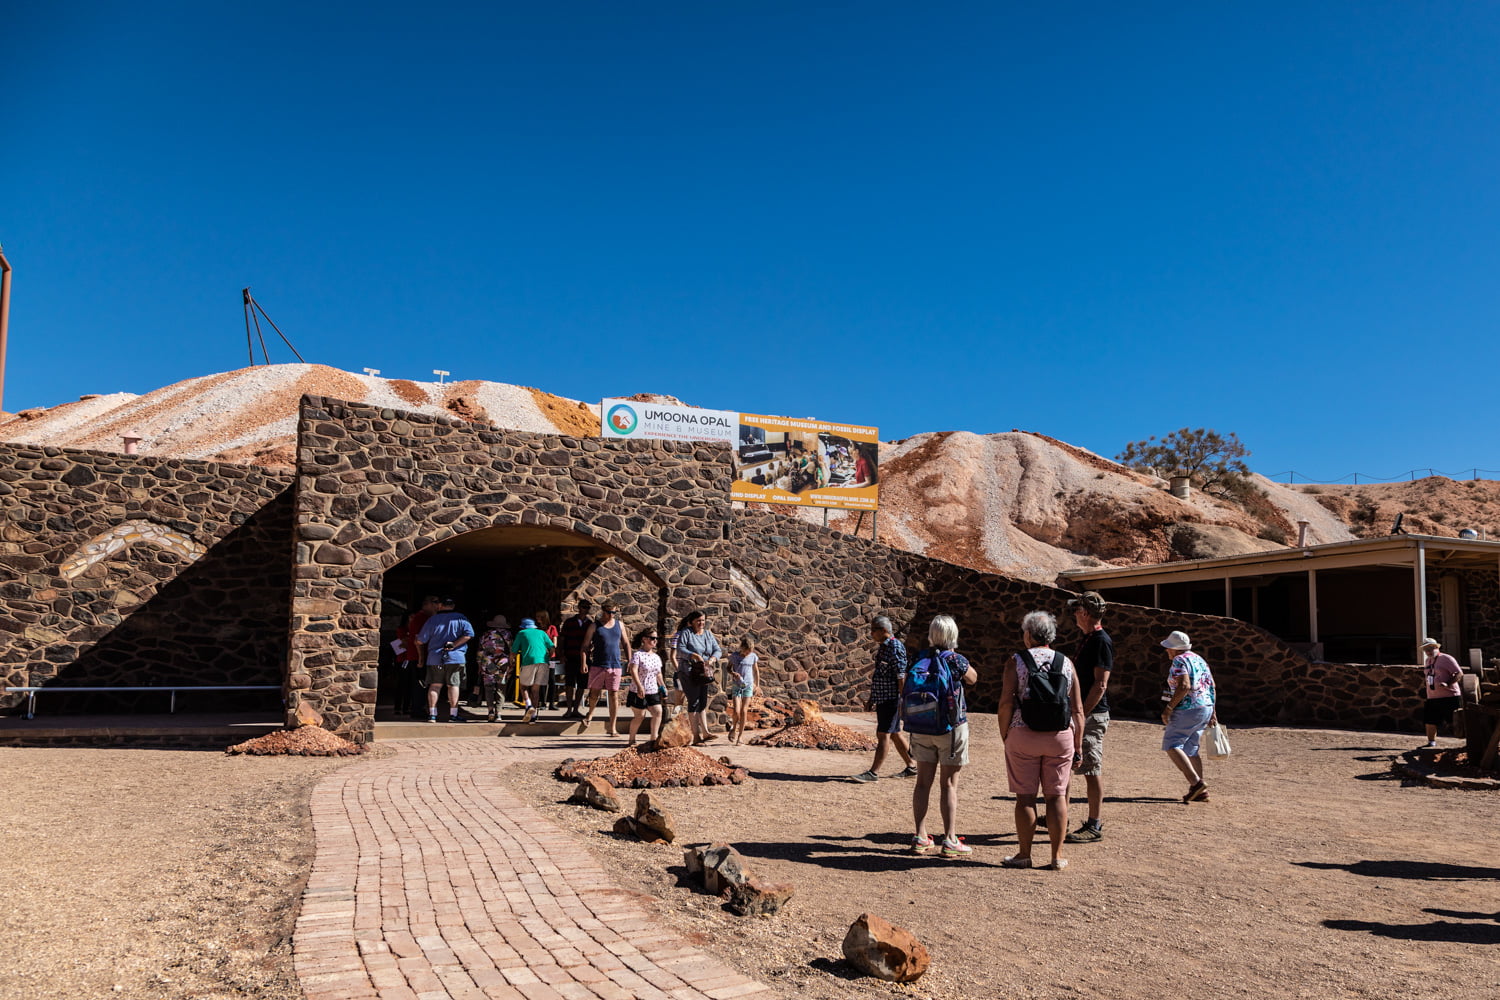 tours to coober pedy